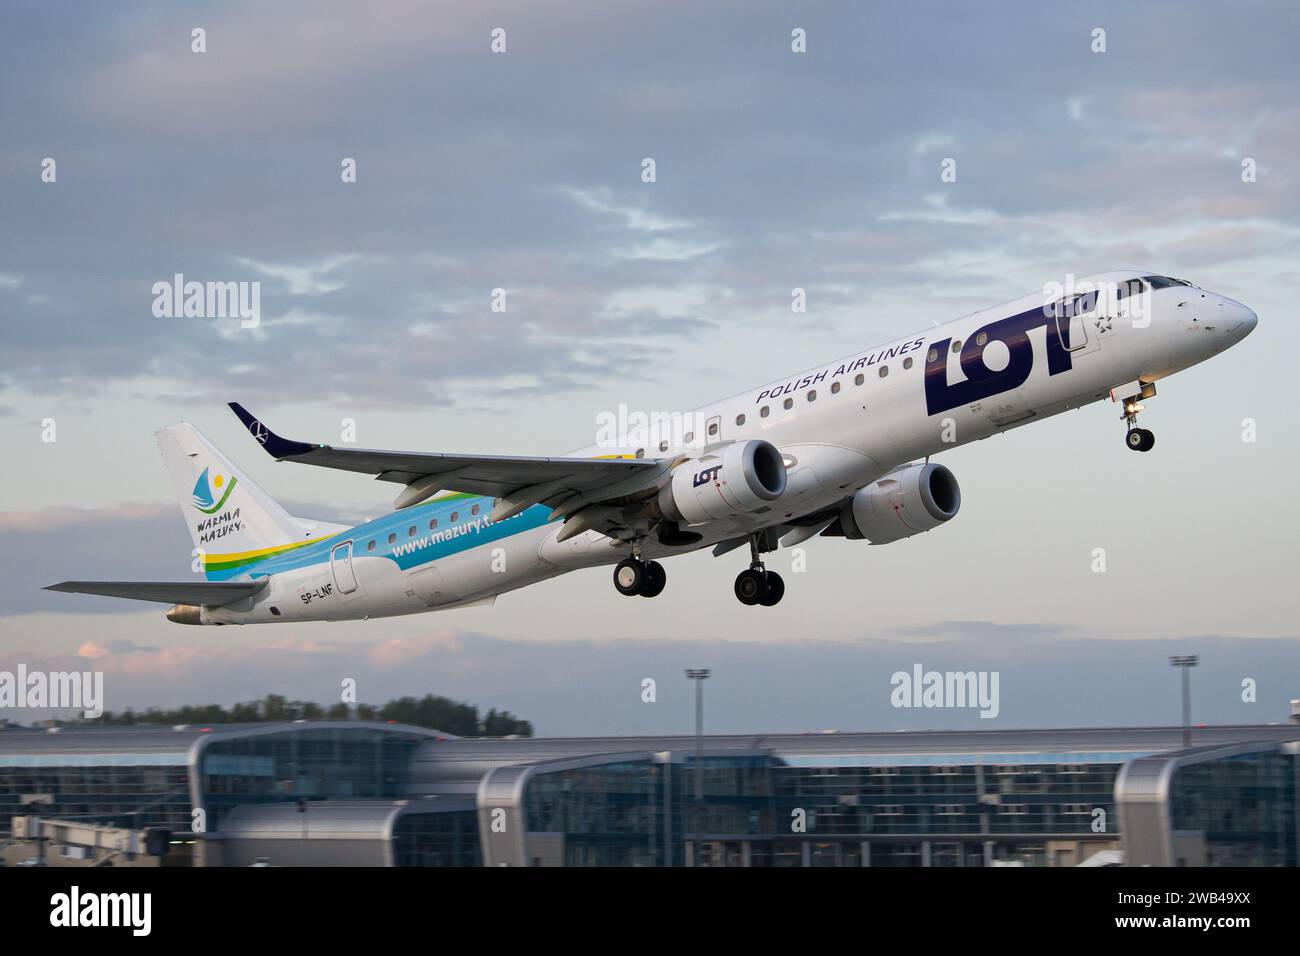 LOT Polish Airlines Embraer E195 wearing 'Warmia Mazury' livery taking off from Lviv Stock Photo